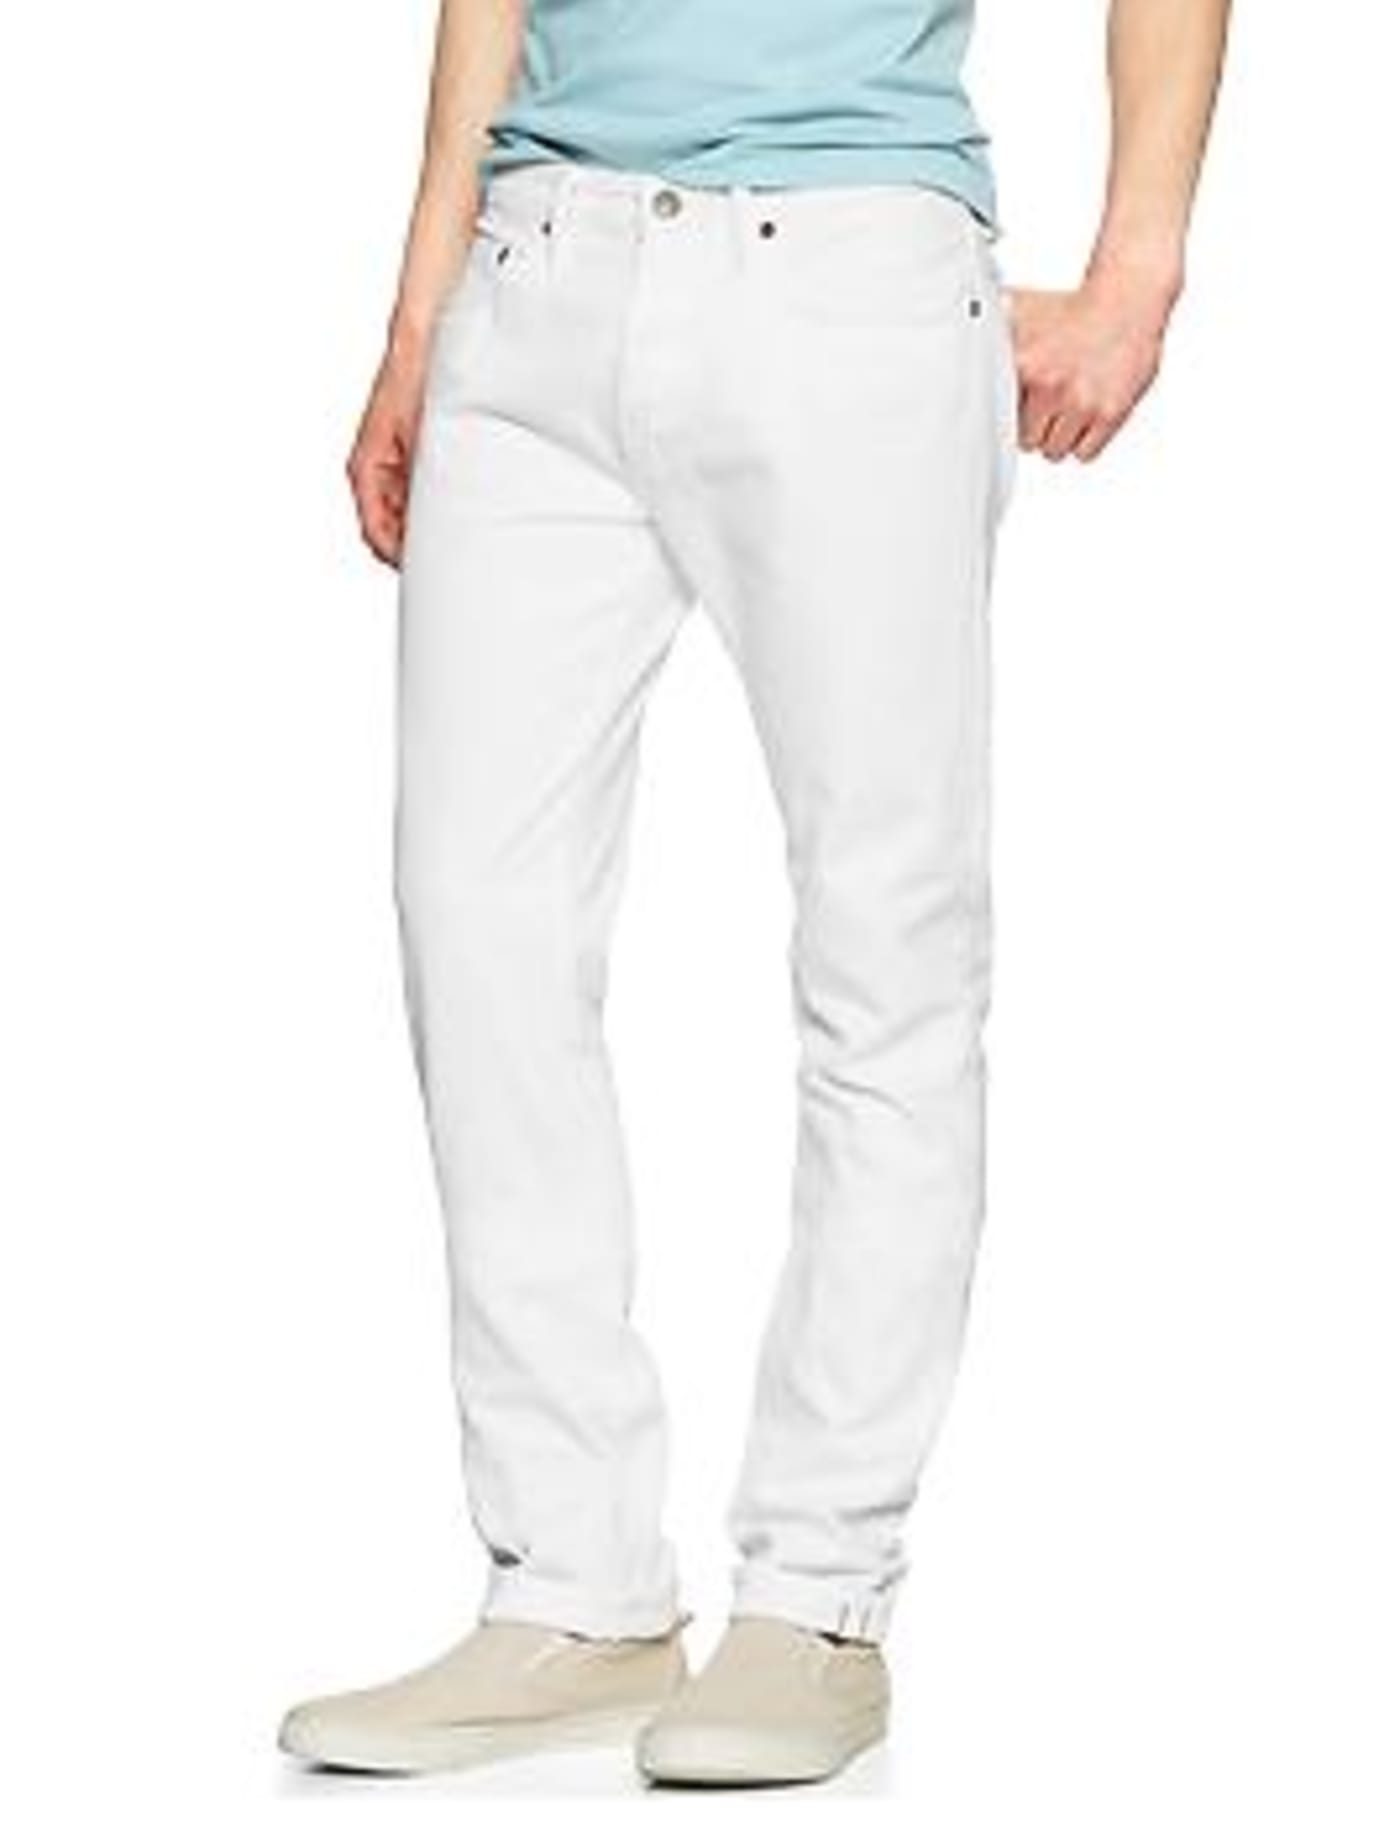 The 15 Best White Pants to Complete Your Coke Boy Outfit | Complex